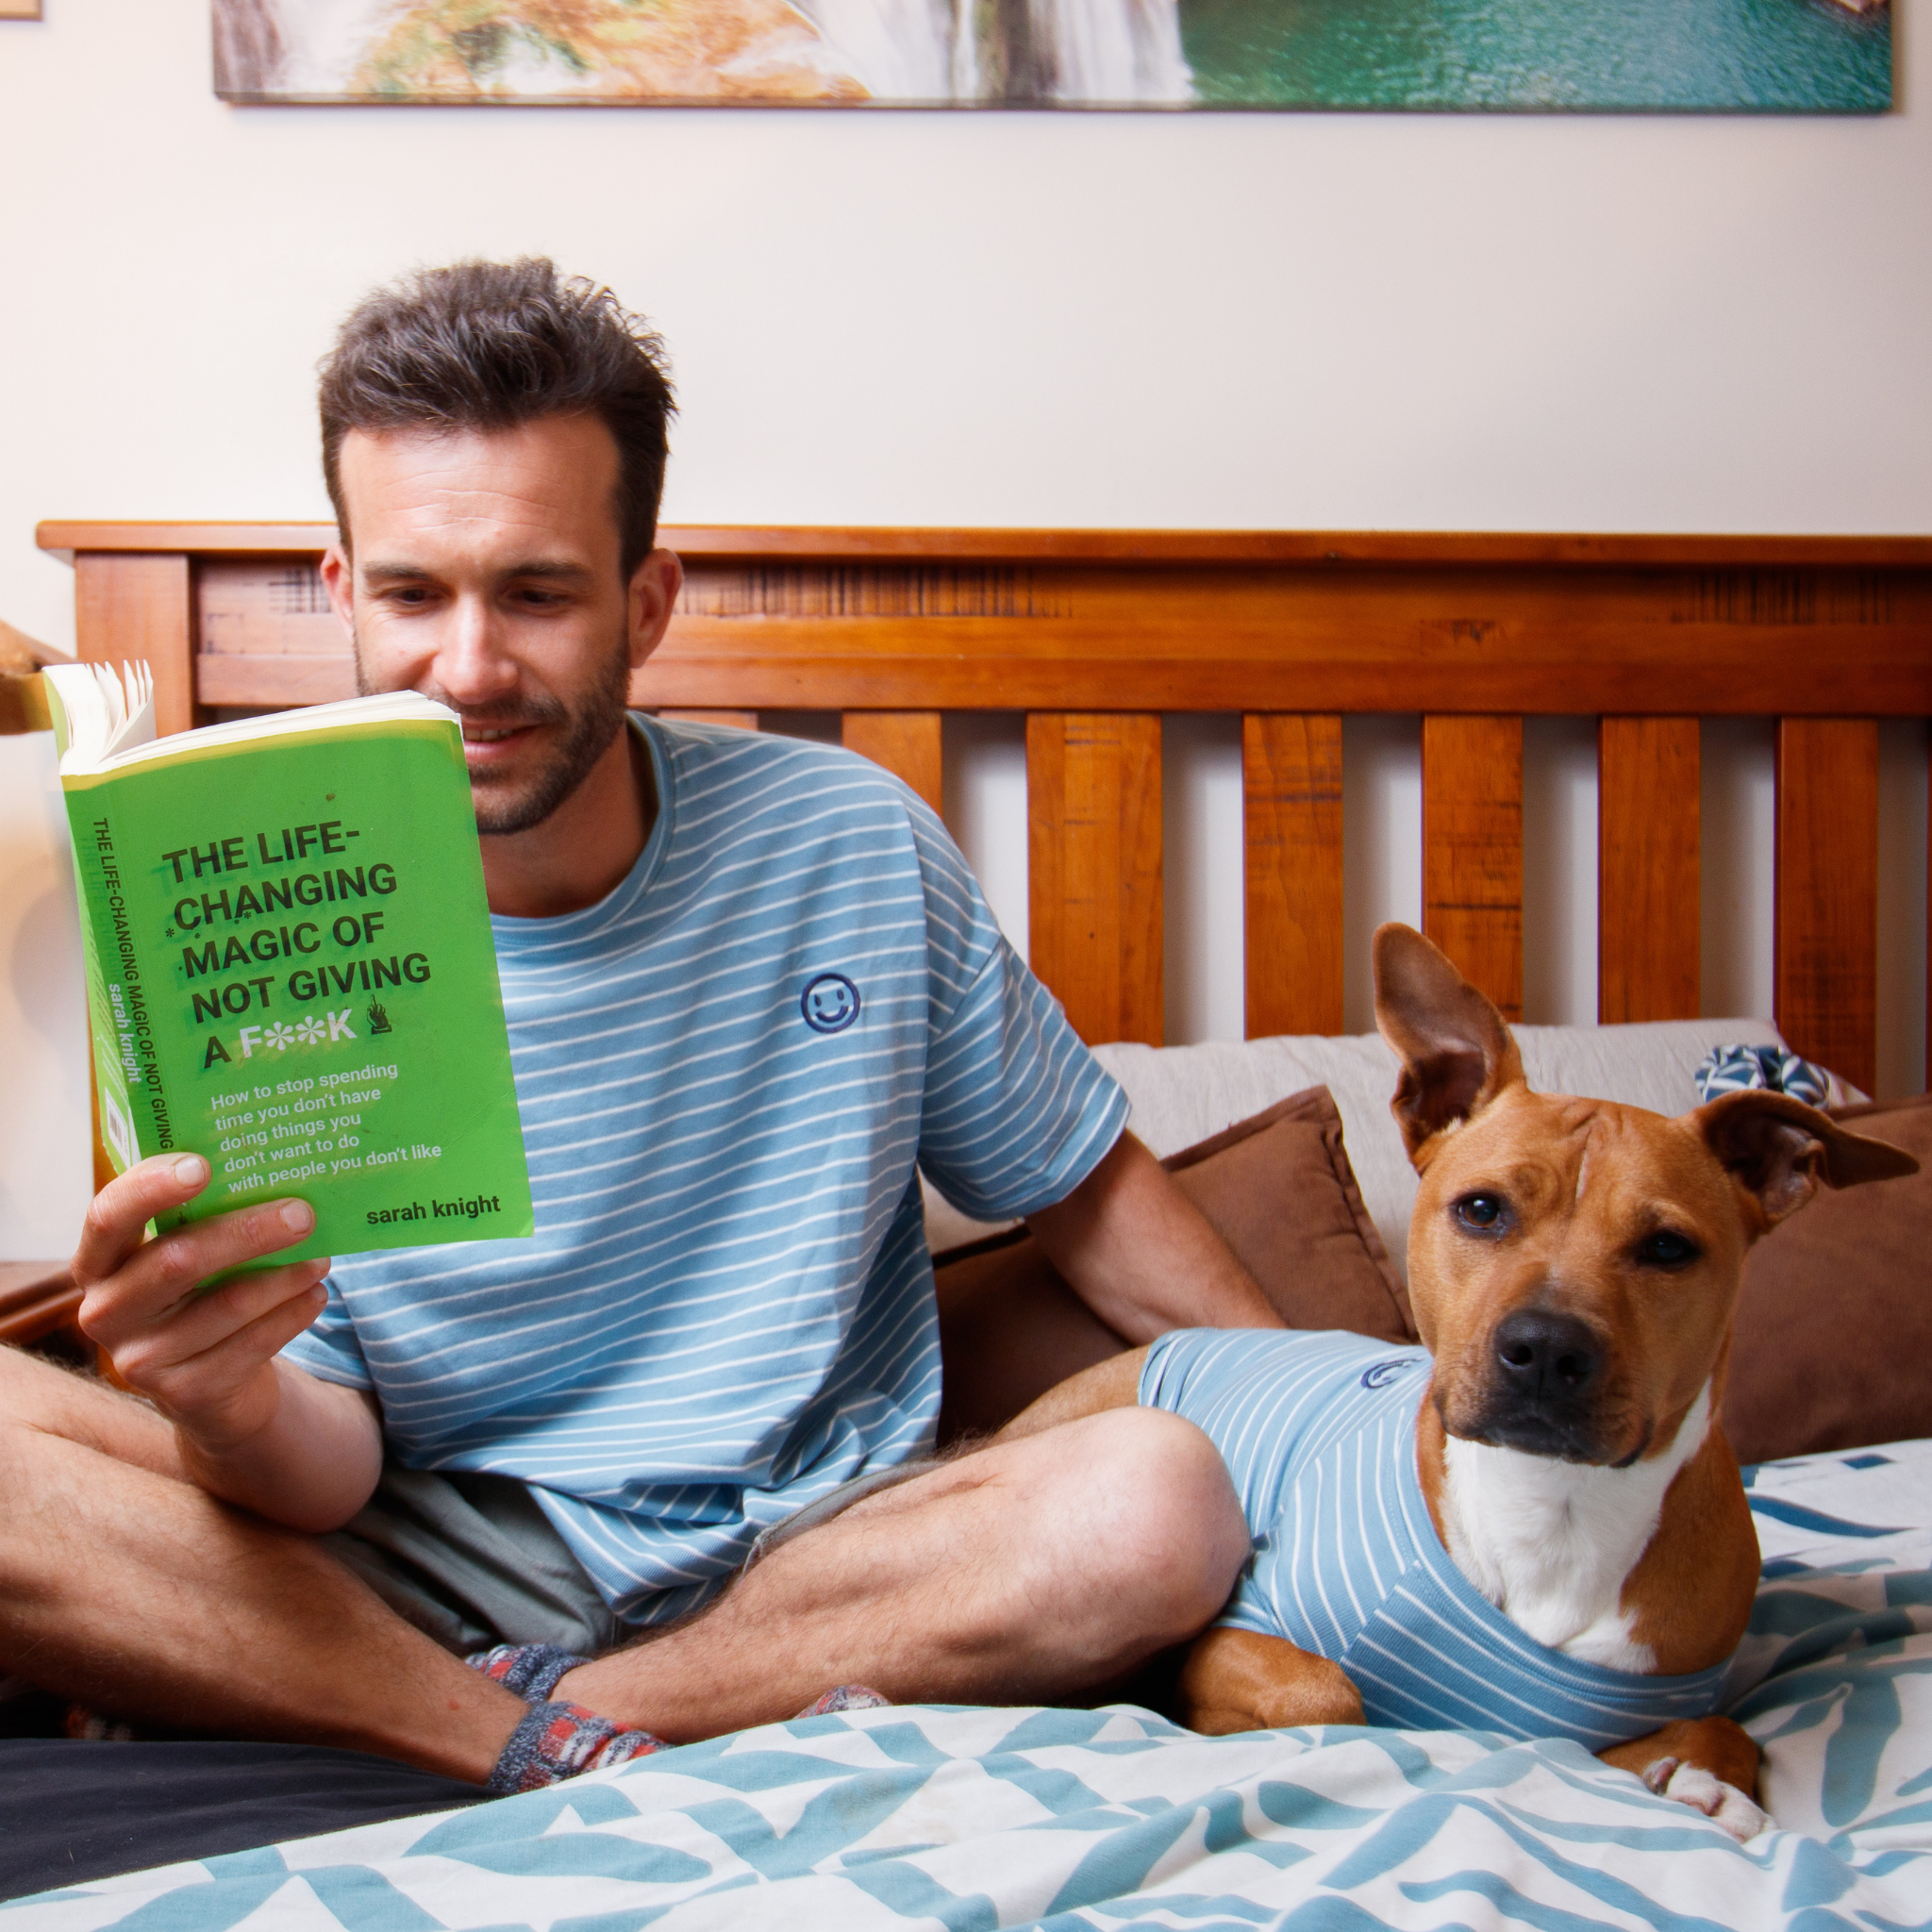 Stripped pijama outfit while dog reads book with owner